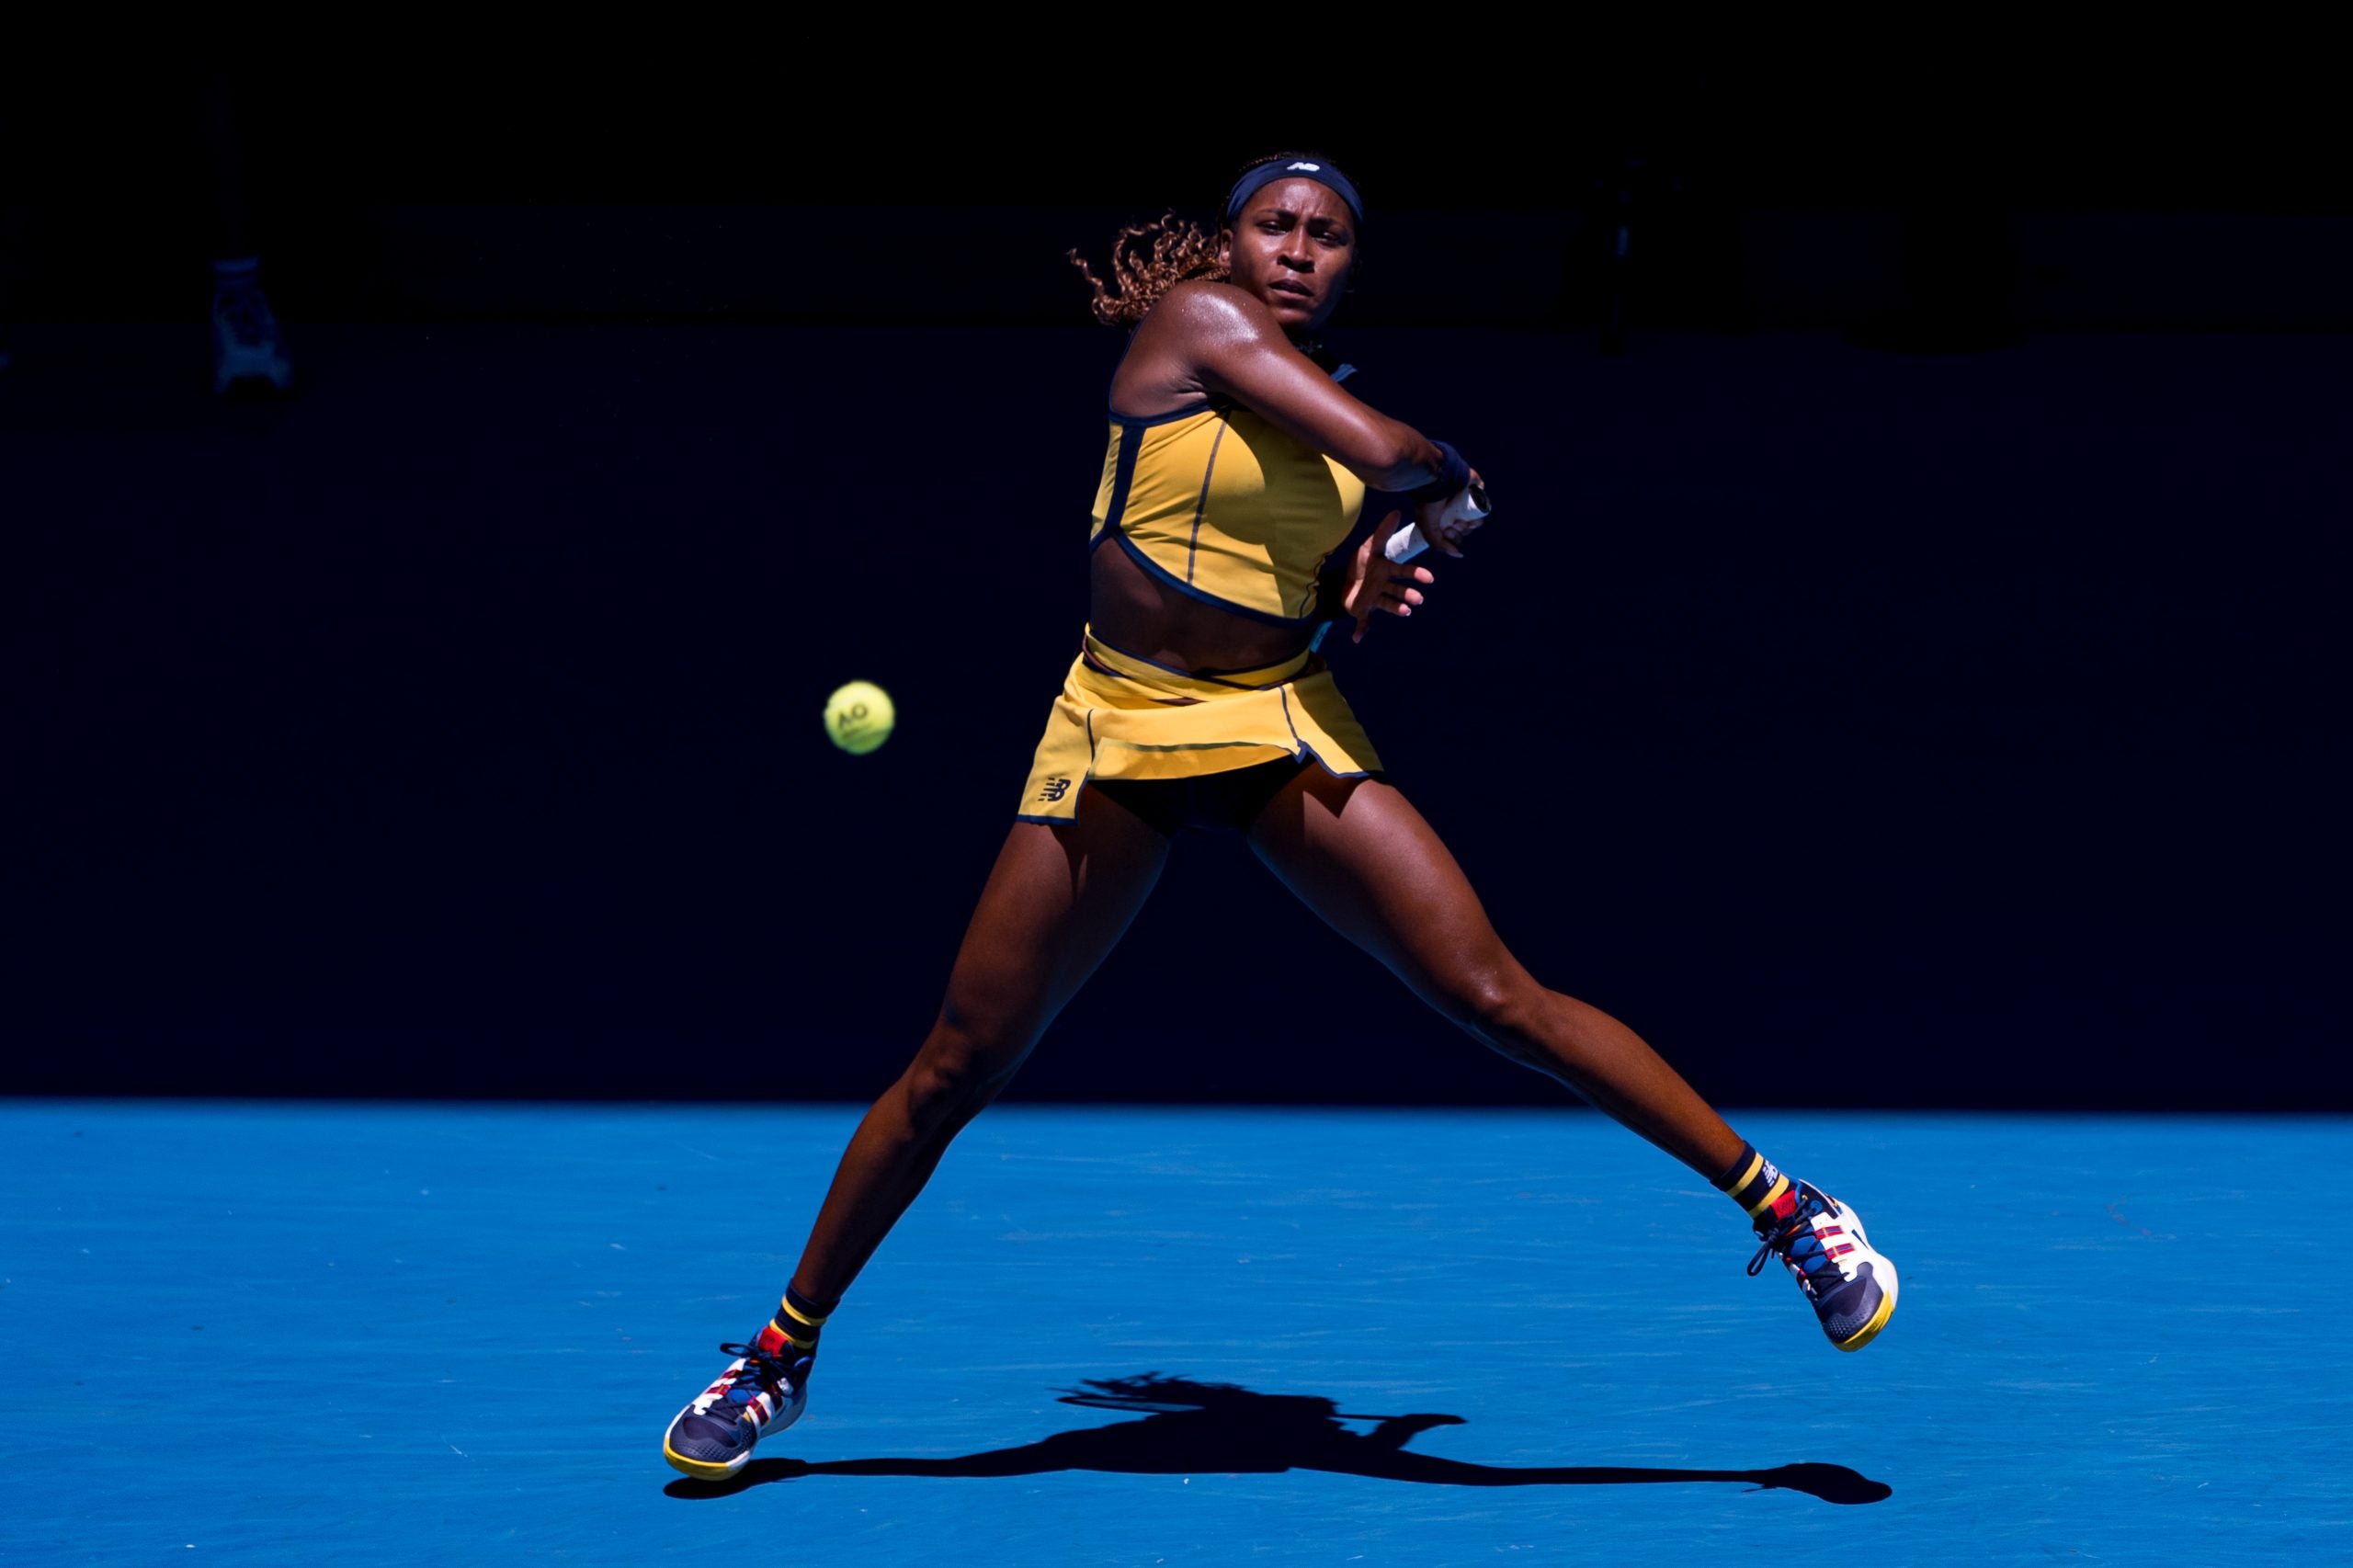 Coco Gauff Advances To Her First Australian Open Semifinal After Nail-Biting Win